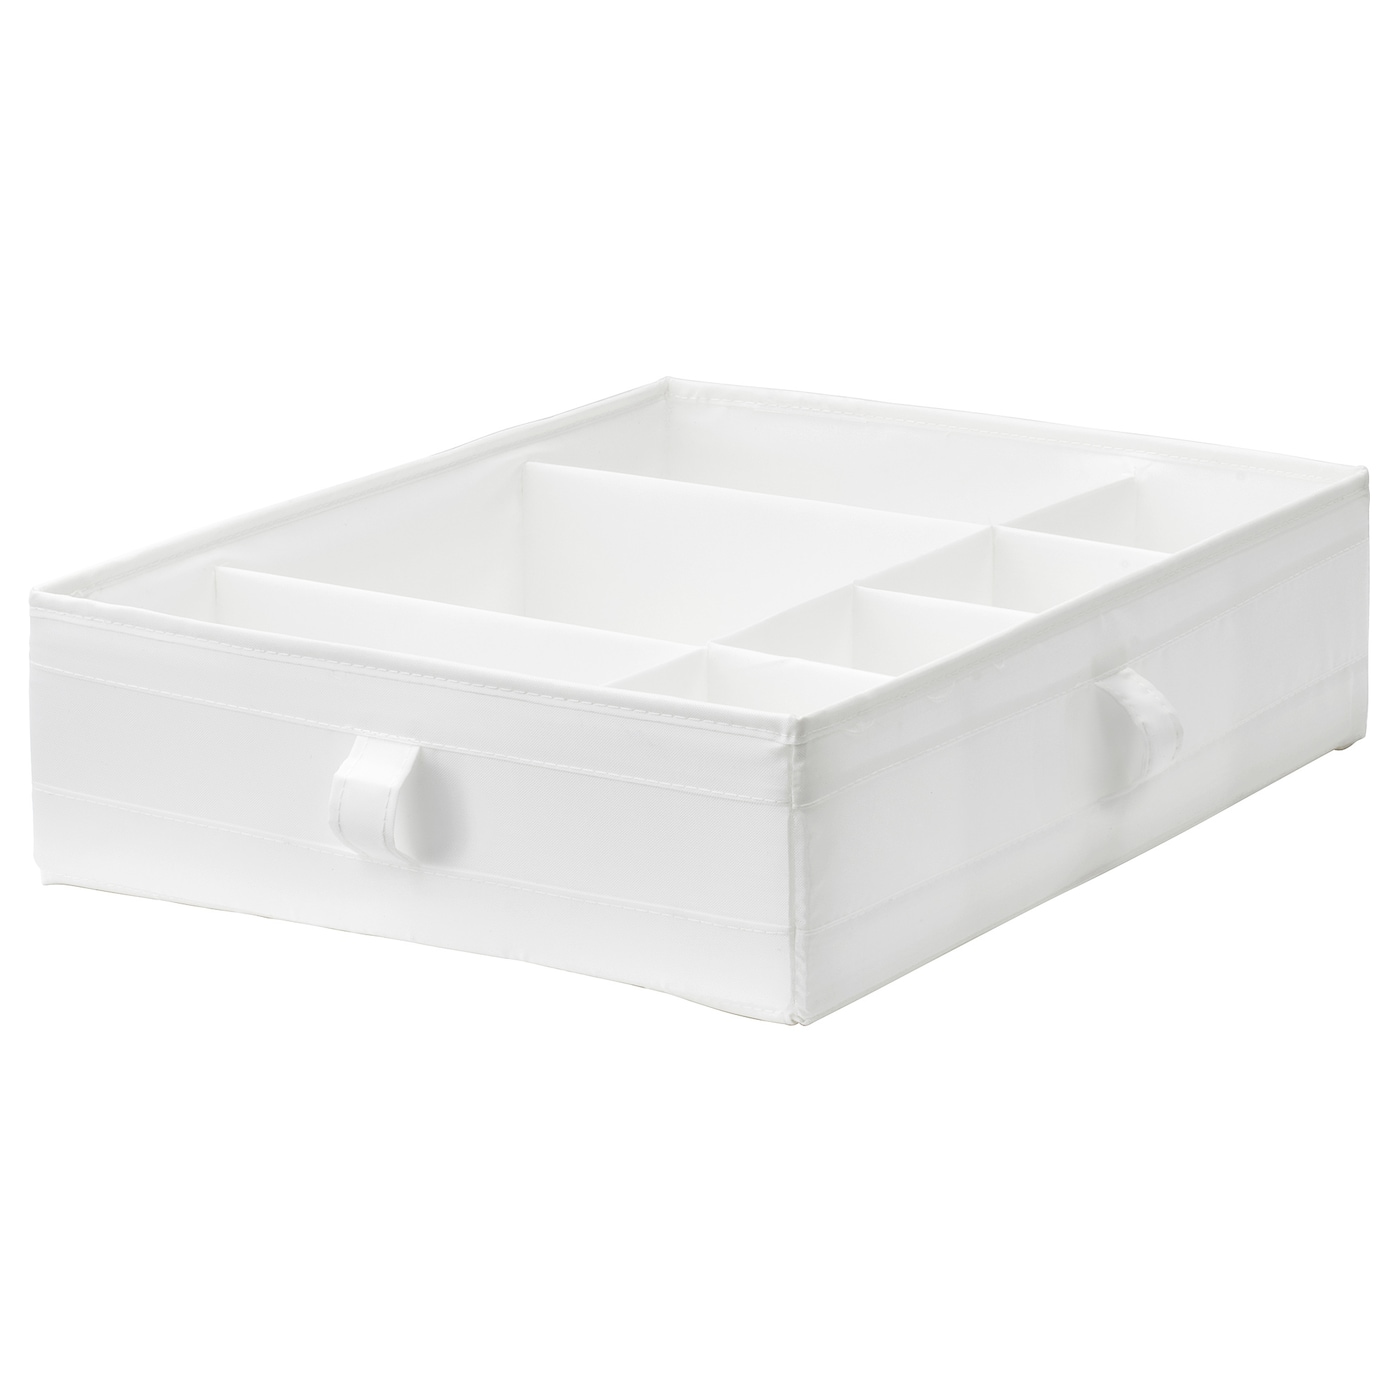 https://img.app.ikea.cn/cn/en/images/products/skubb-box-with-compartments-white__0711138_pe728006_s5.jpg